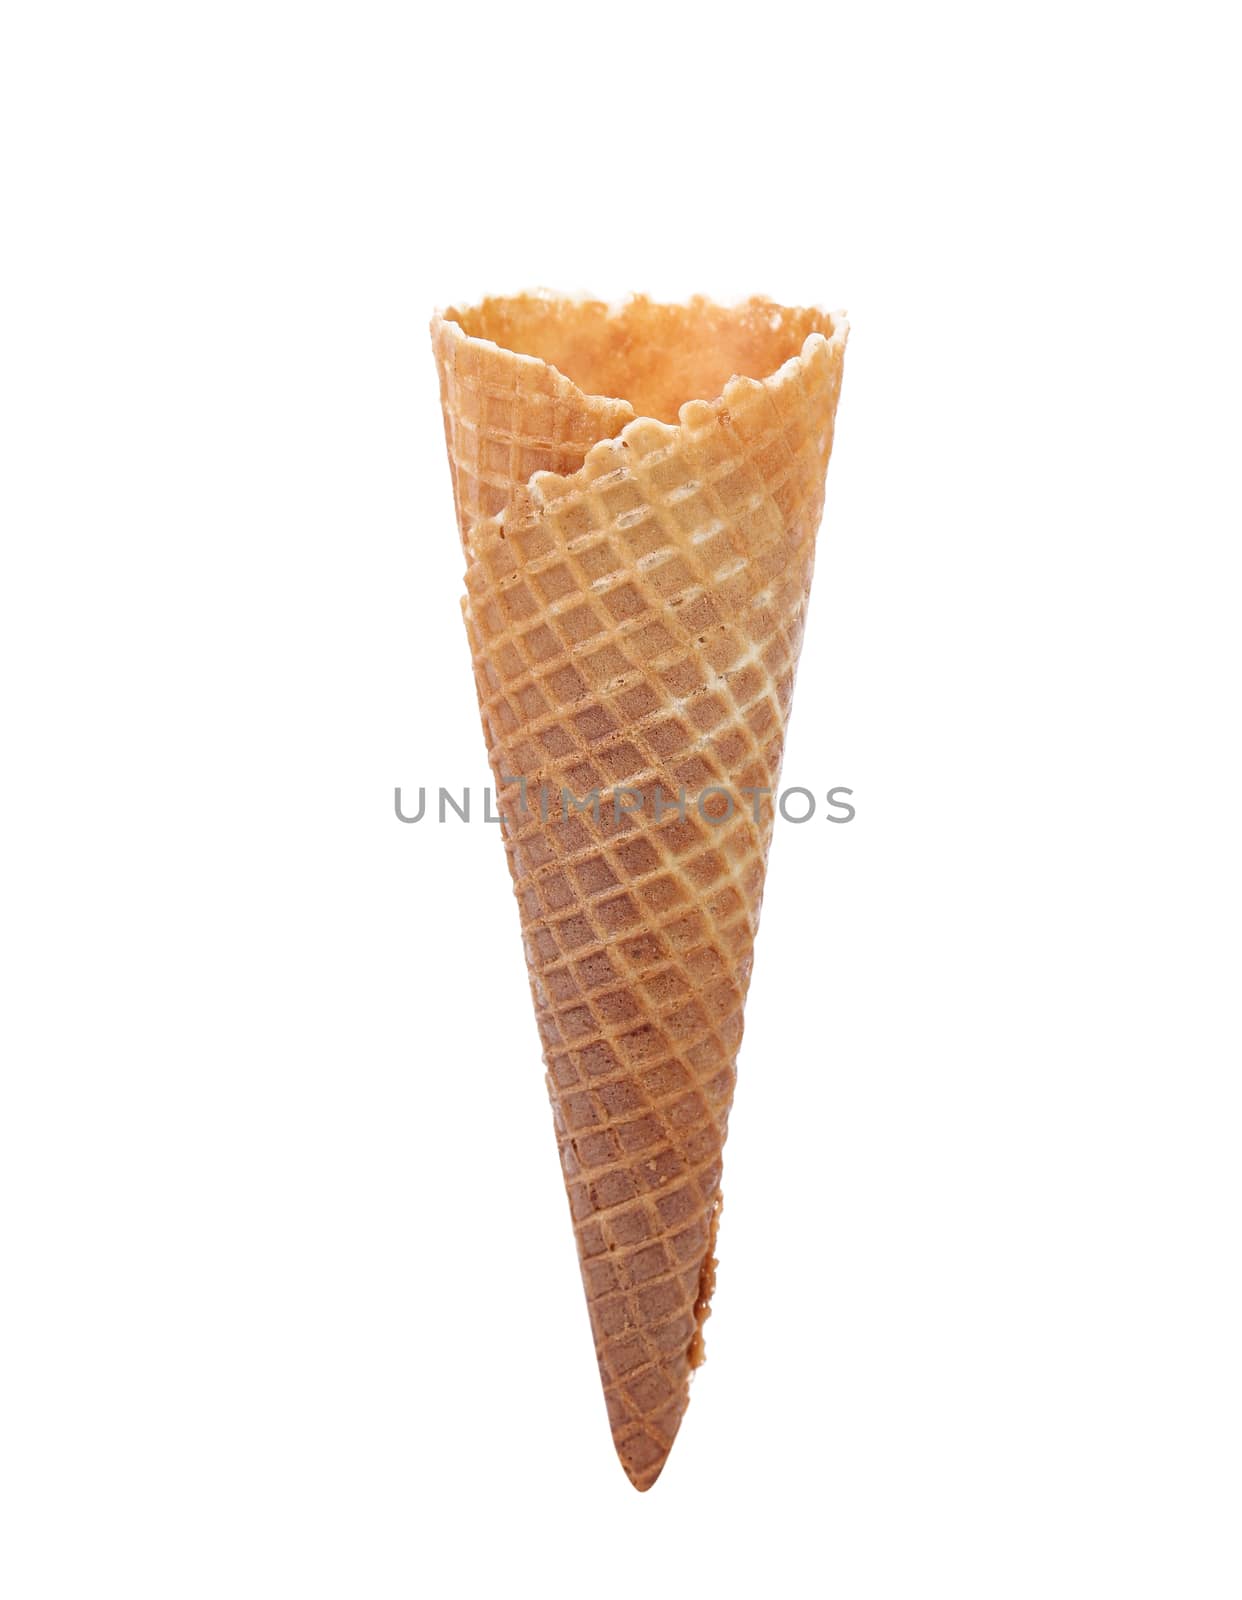 Wafer cup for ice-cream. Isolated. White background.